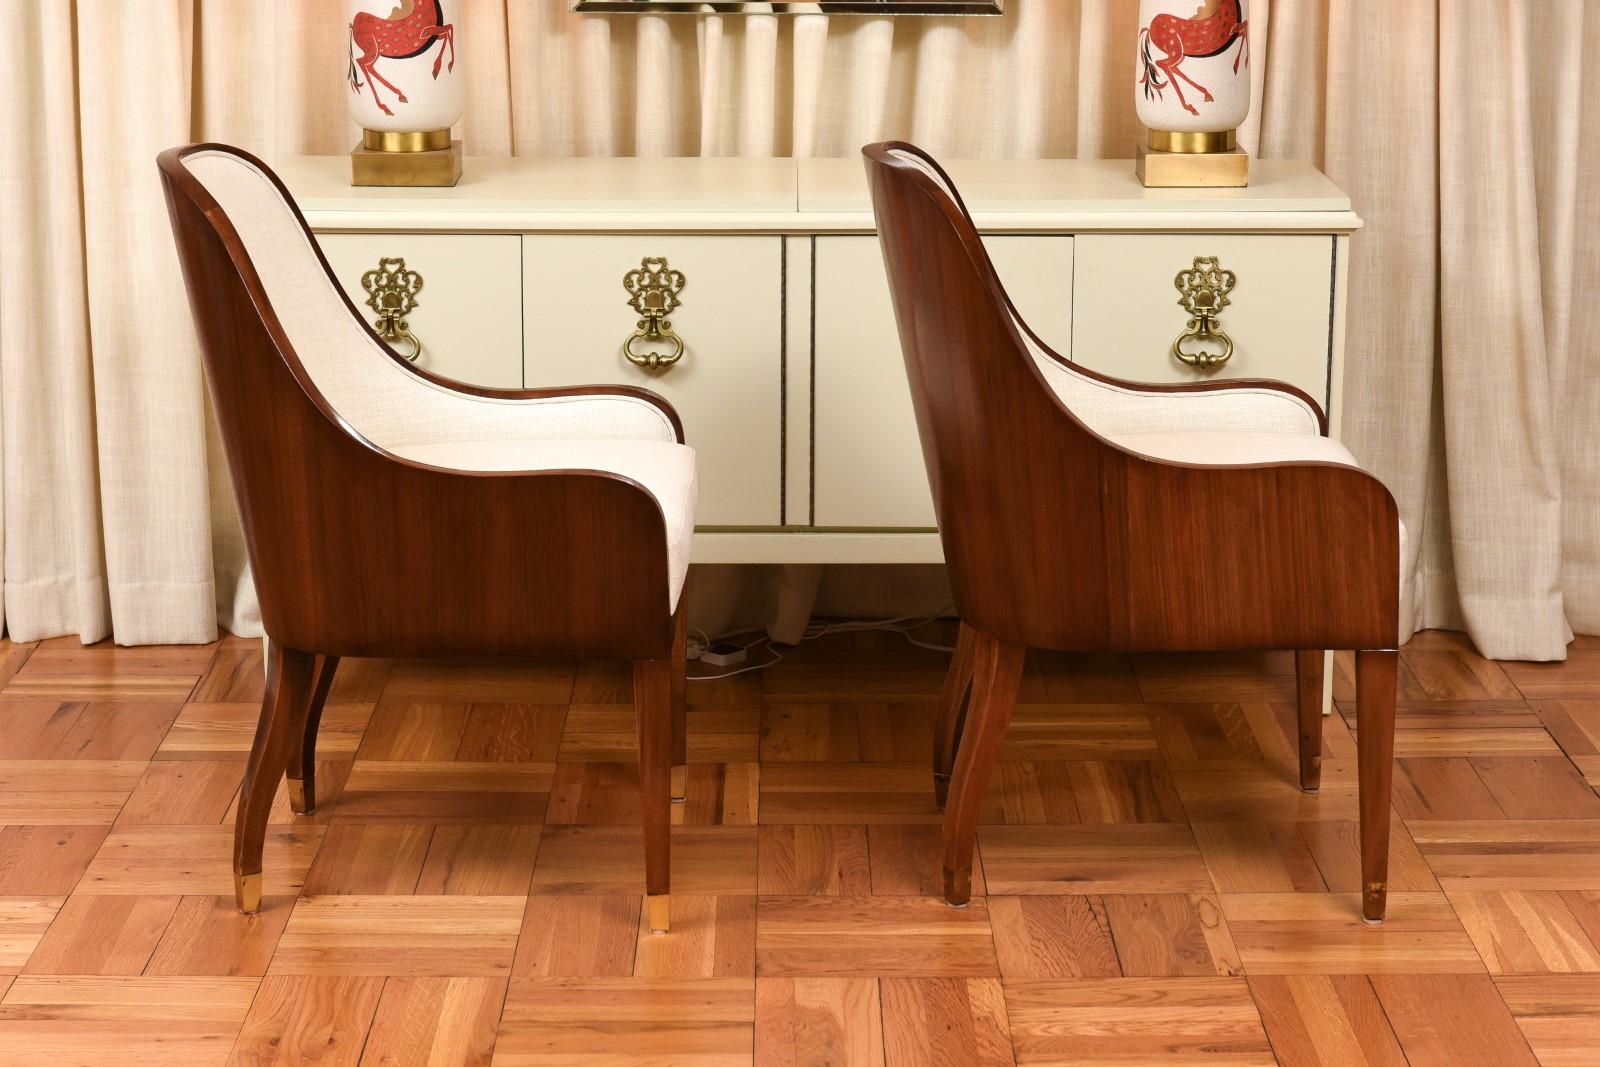 Spectacular Set of 10 Art Deco Revival Chairs in Bookmatch Figured Walnut For Sale 3